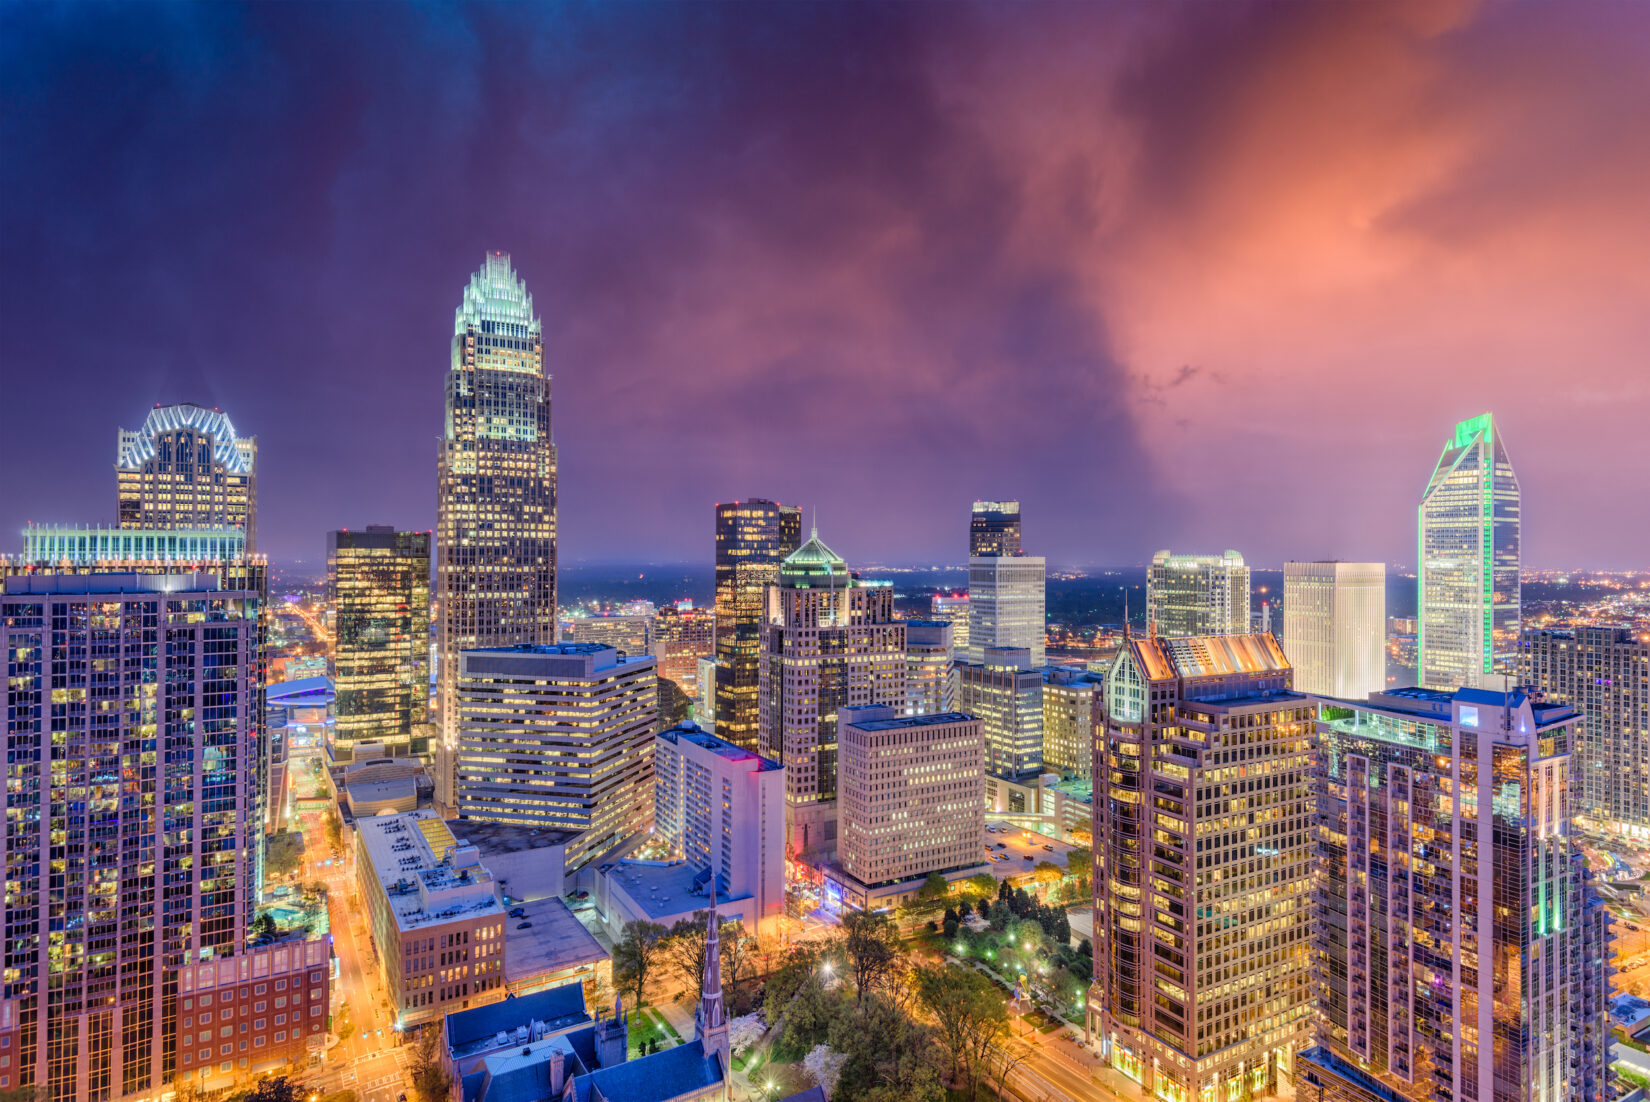 Charlotte, North Carolina city skyscrapers lit up against a colorful and vibrant sky. Charlotte real estate photography by CS3. Charlotte aerial photography.